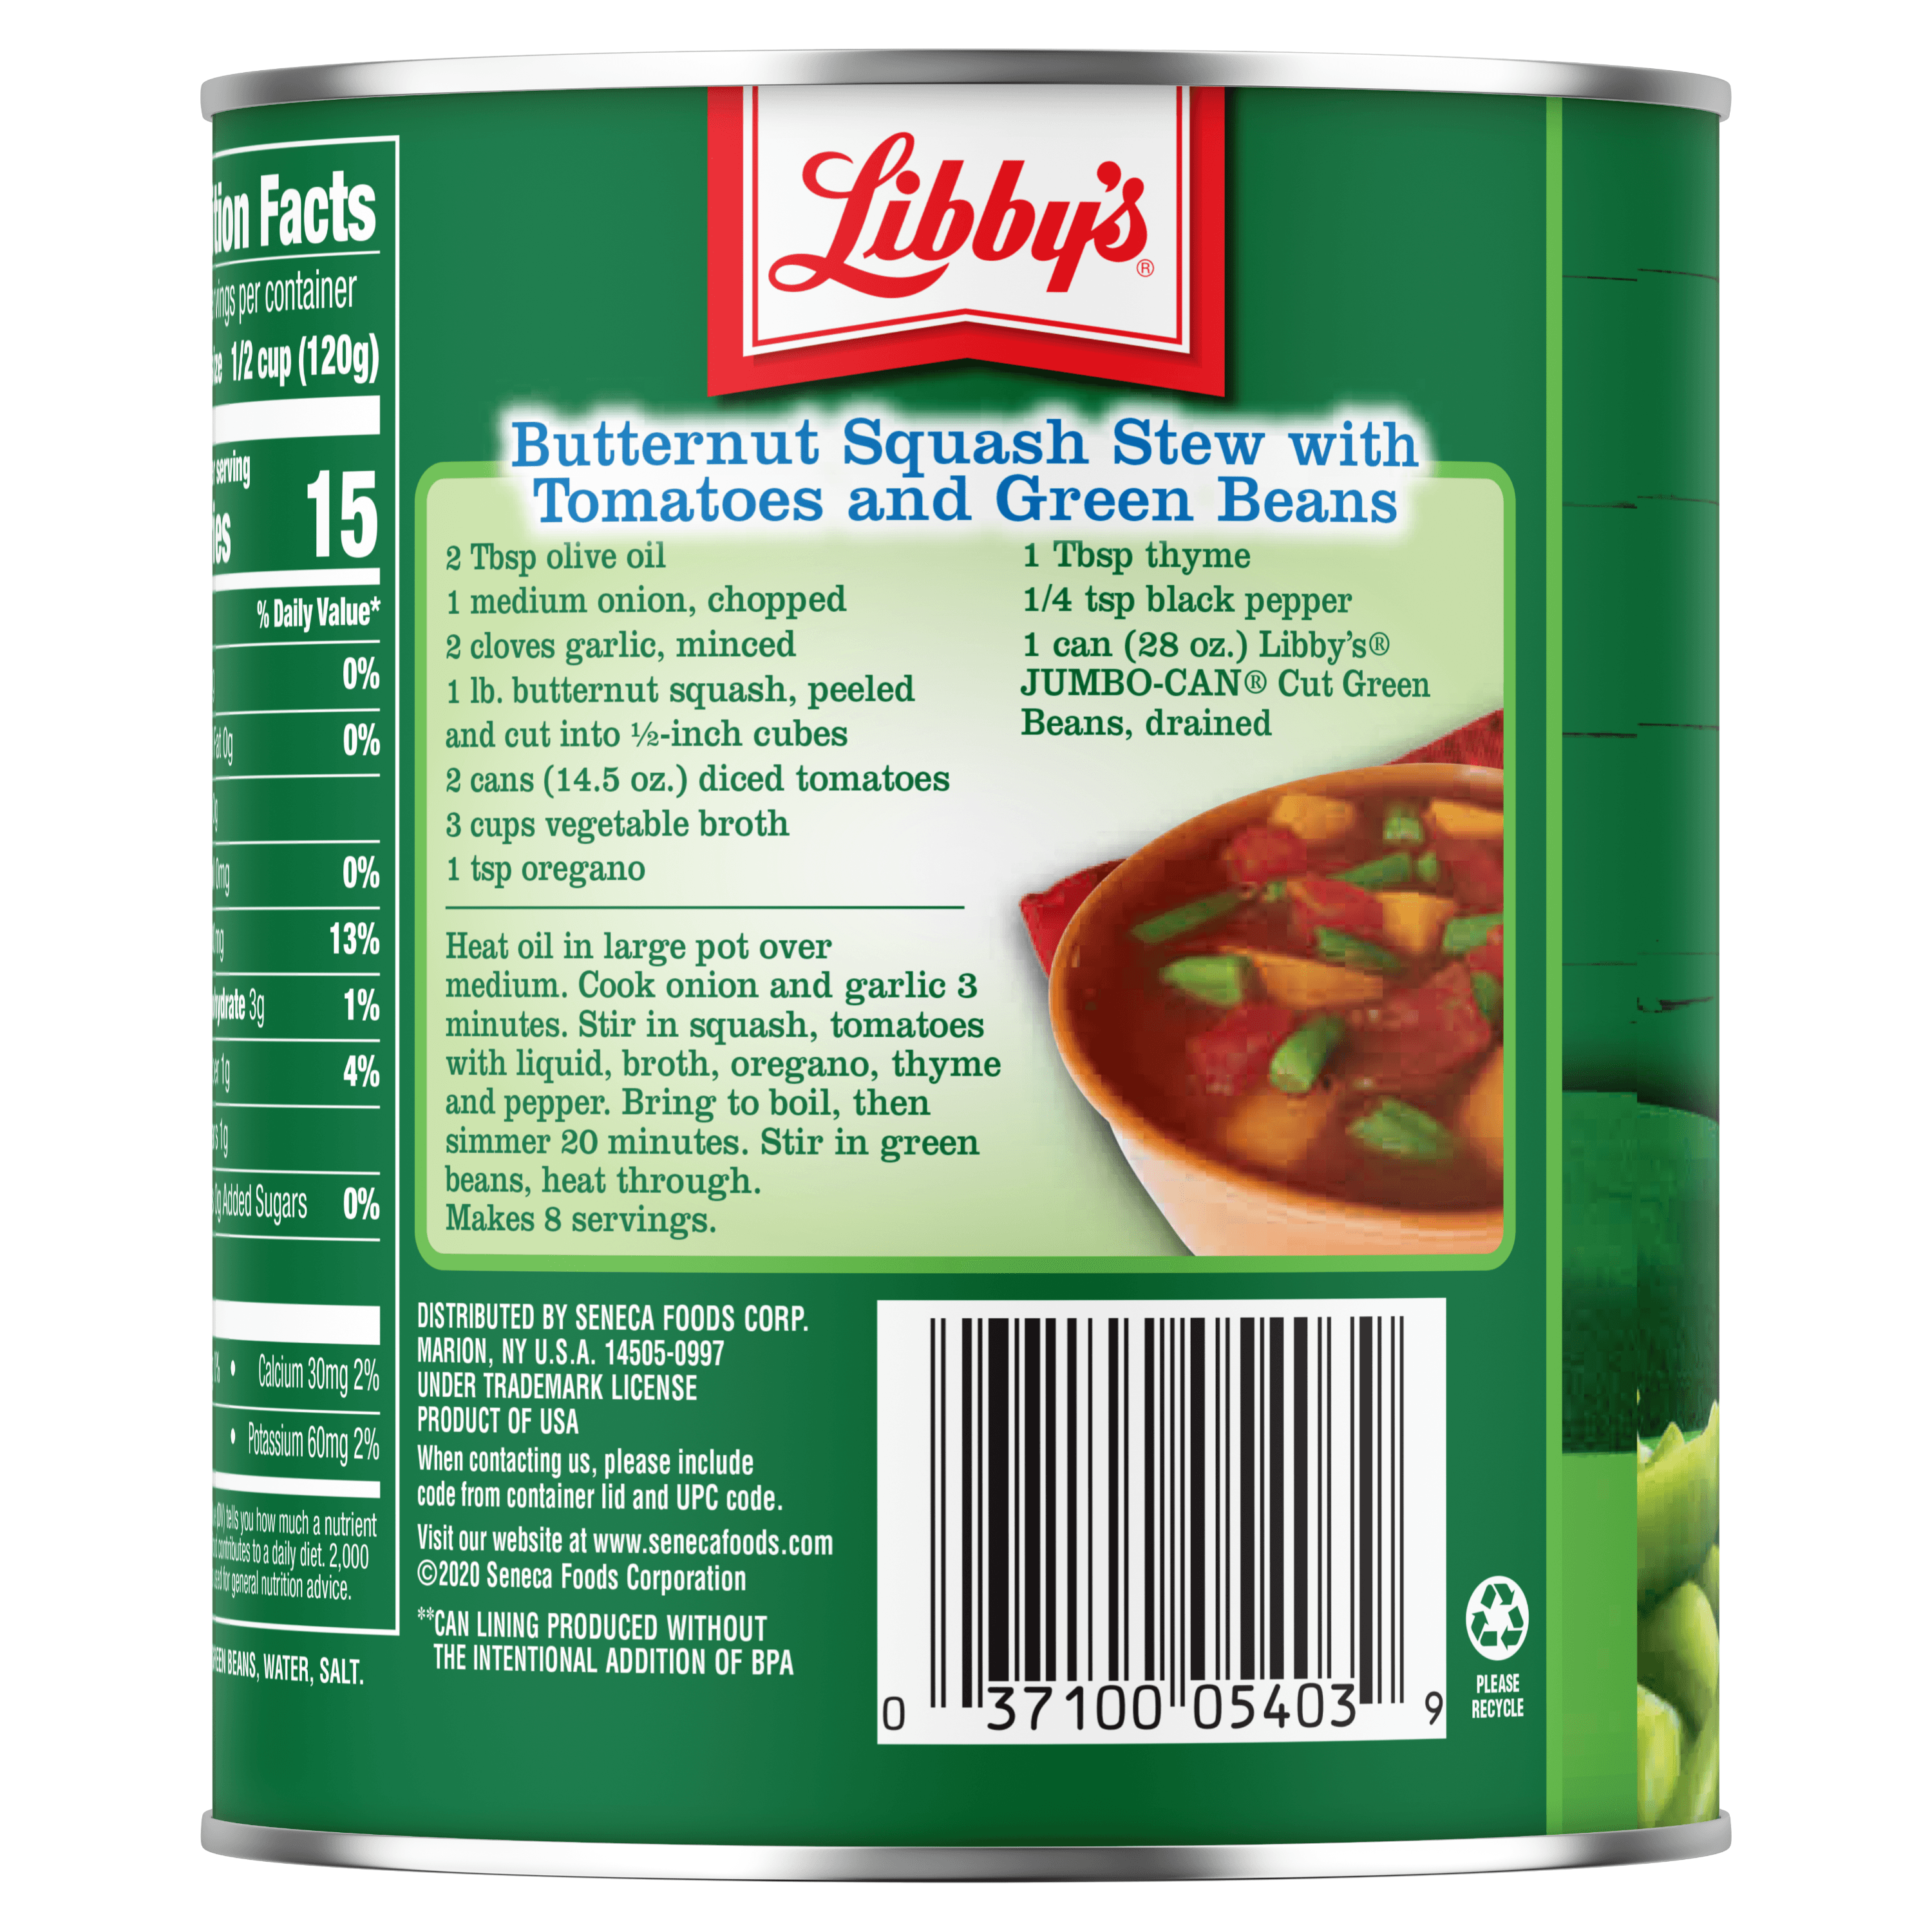 Canned Green Beans Ingredient statement and Recipe, Libby's Cut Green Beans, 28 oz. Can, Jumbo-Can